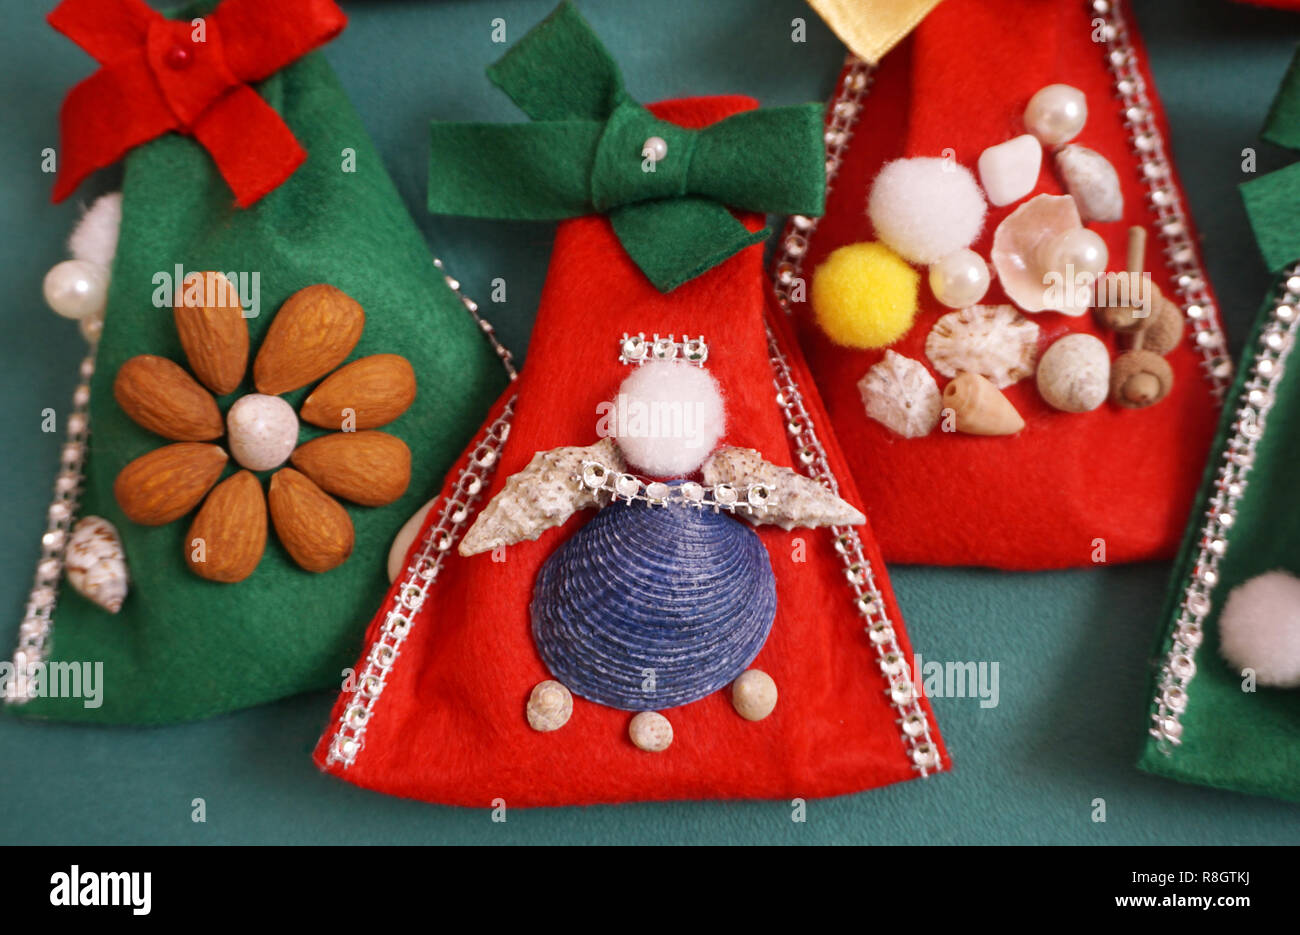 Angel handmade craft, made from seashells, beads, pompons and dried fruit on the felt bag. Christmas craft decoration concept Stock Photo